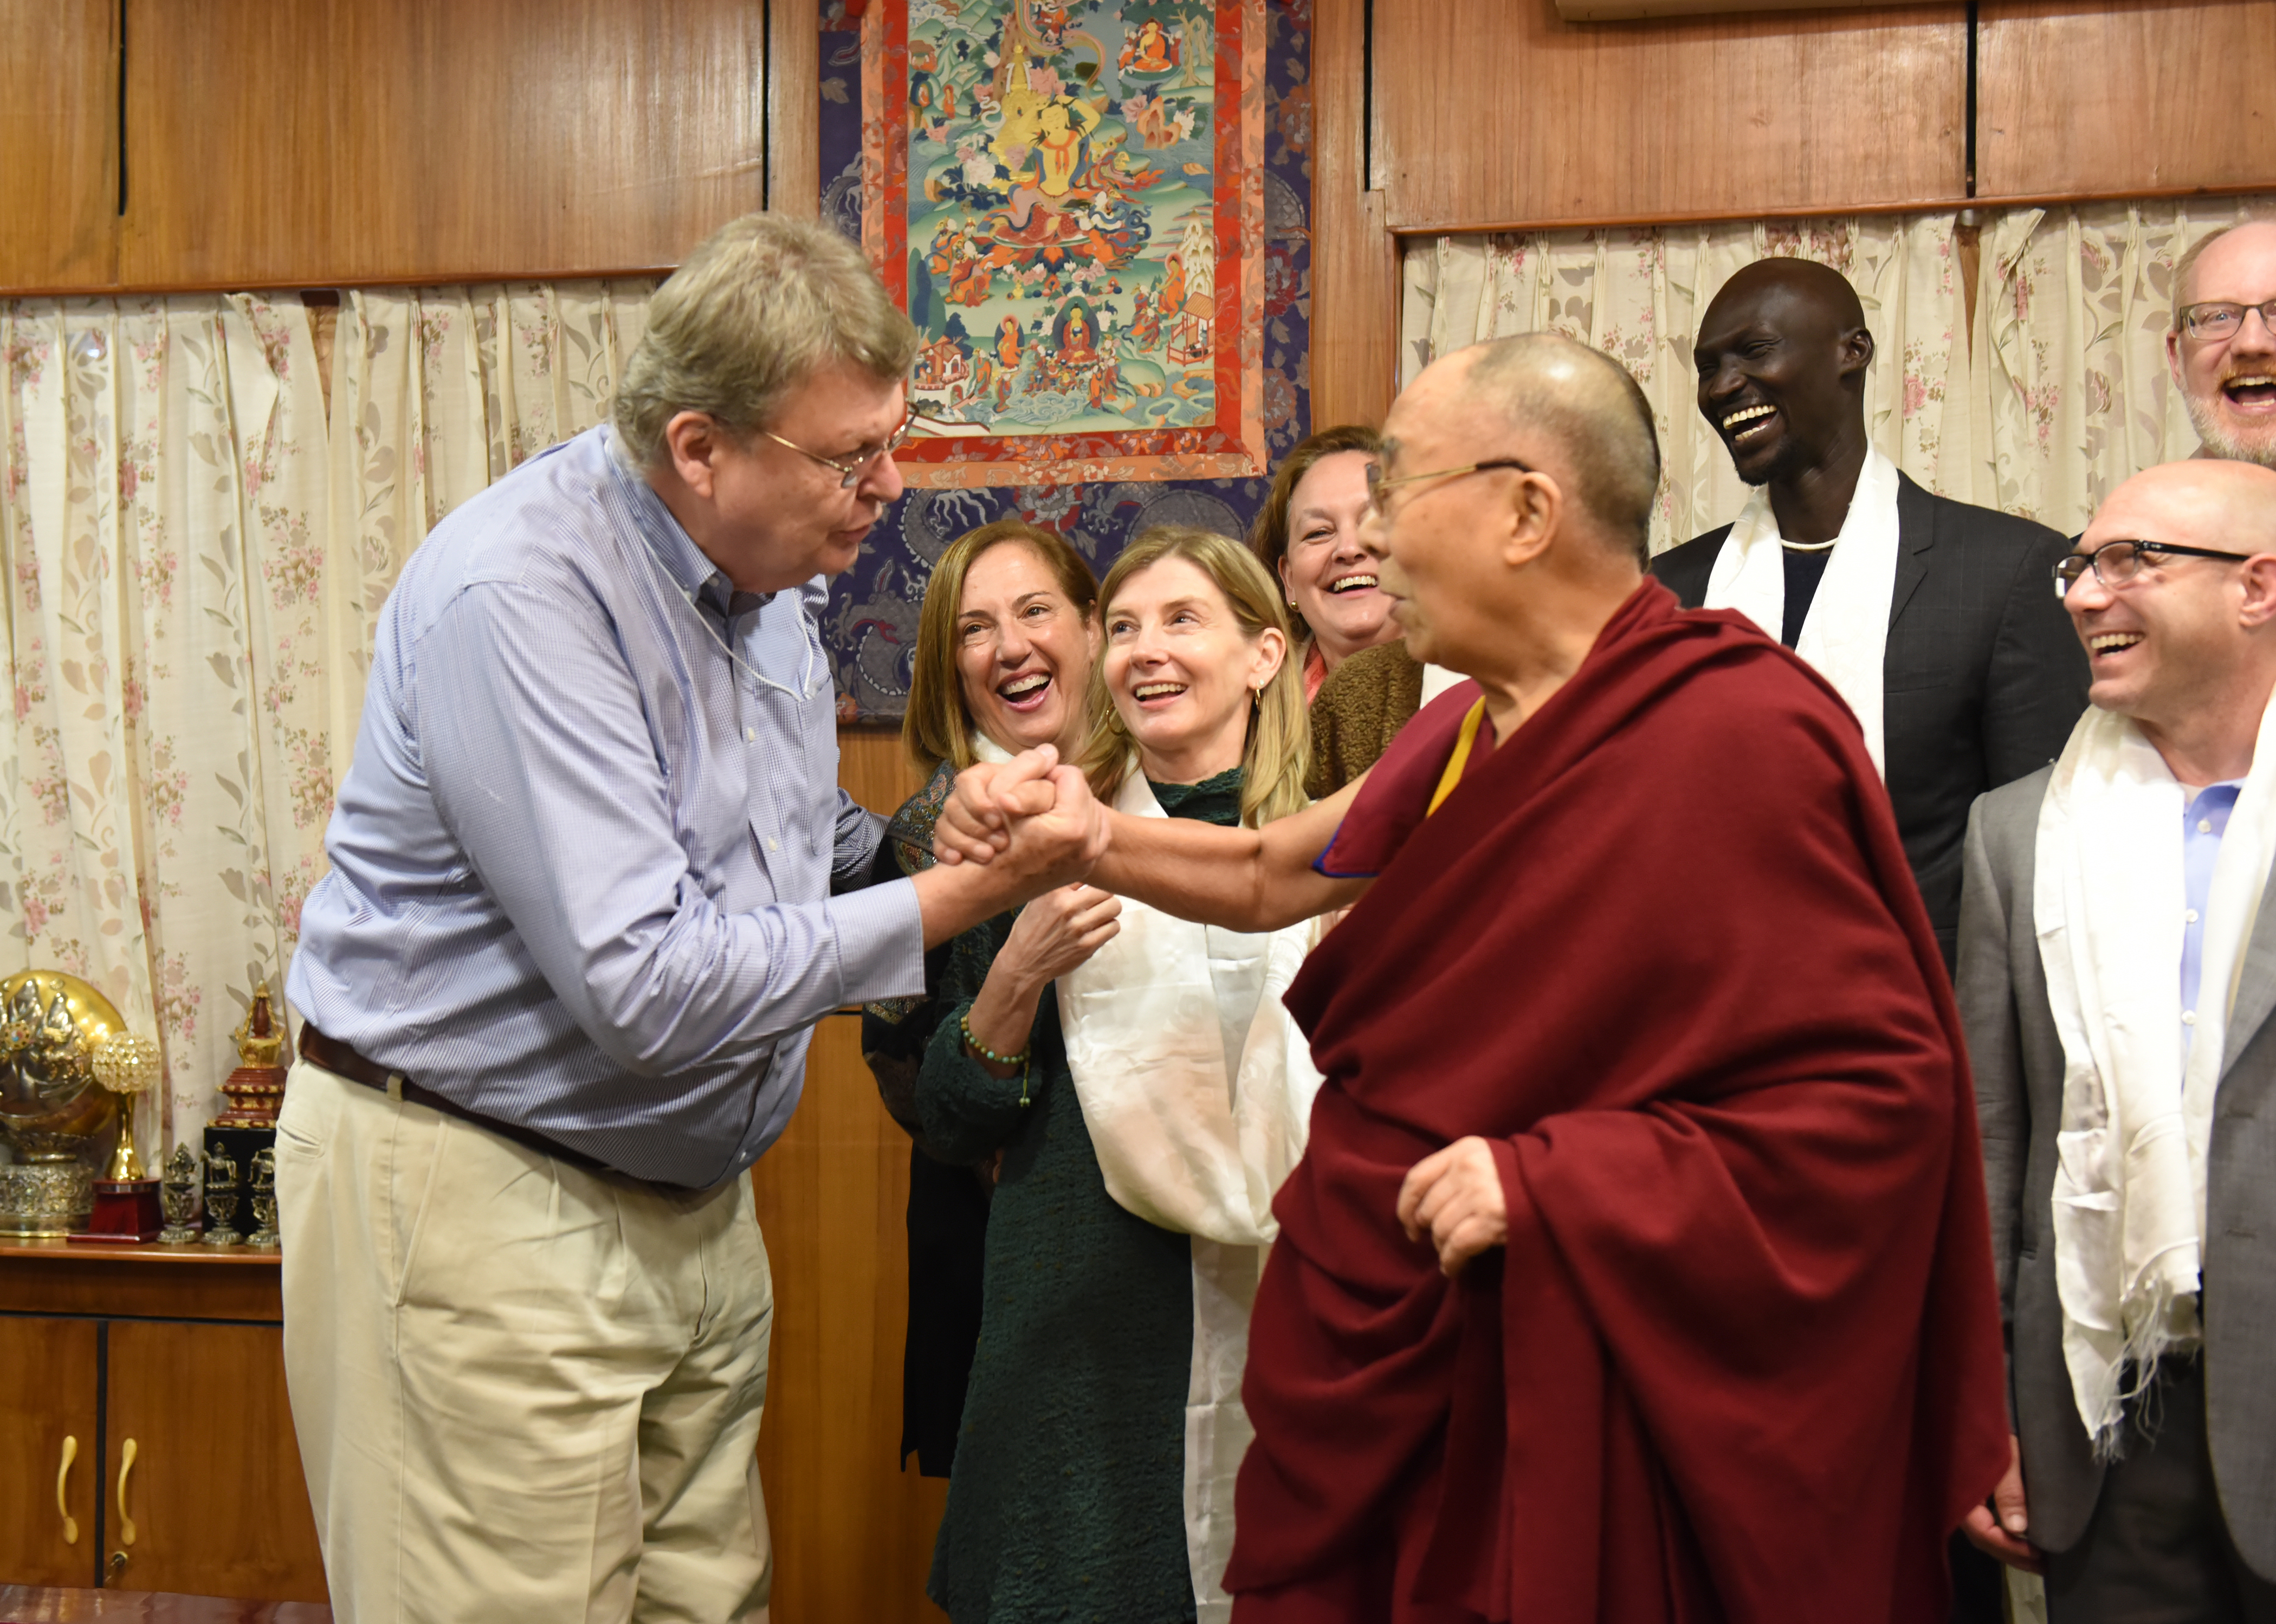 His Holiness the Dalai Lama here with USIP's photographer, Bill Fitz-Patrick